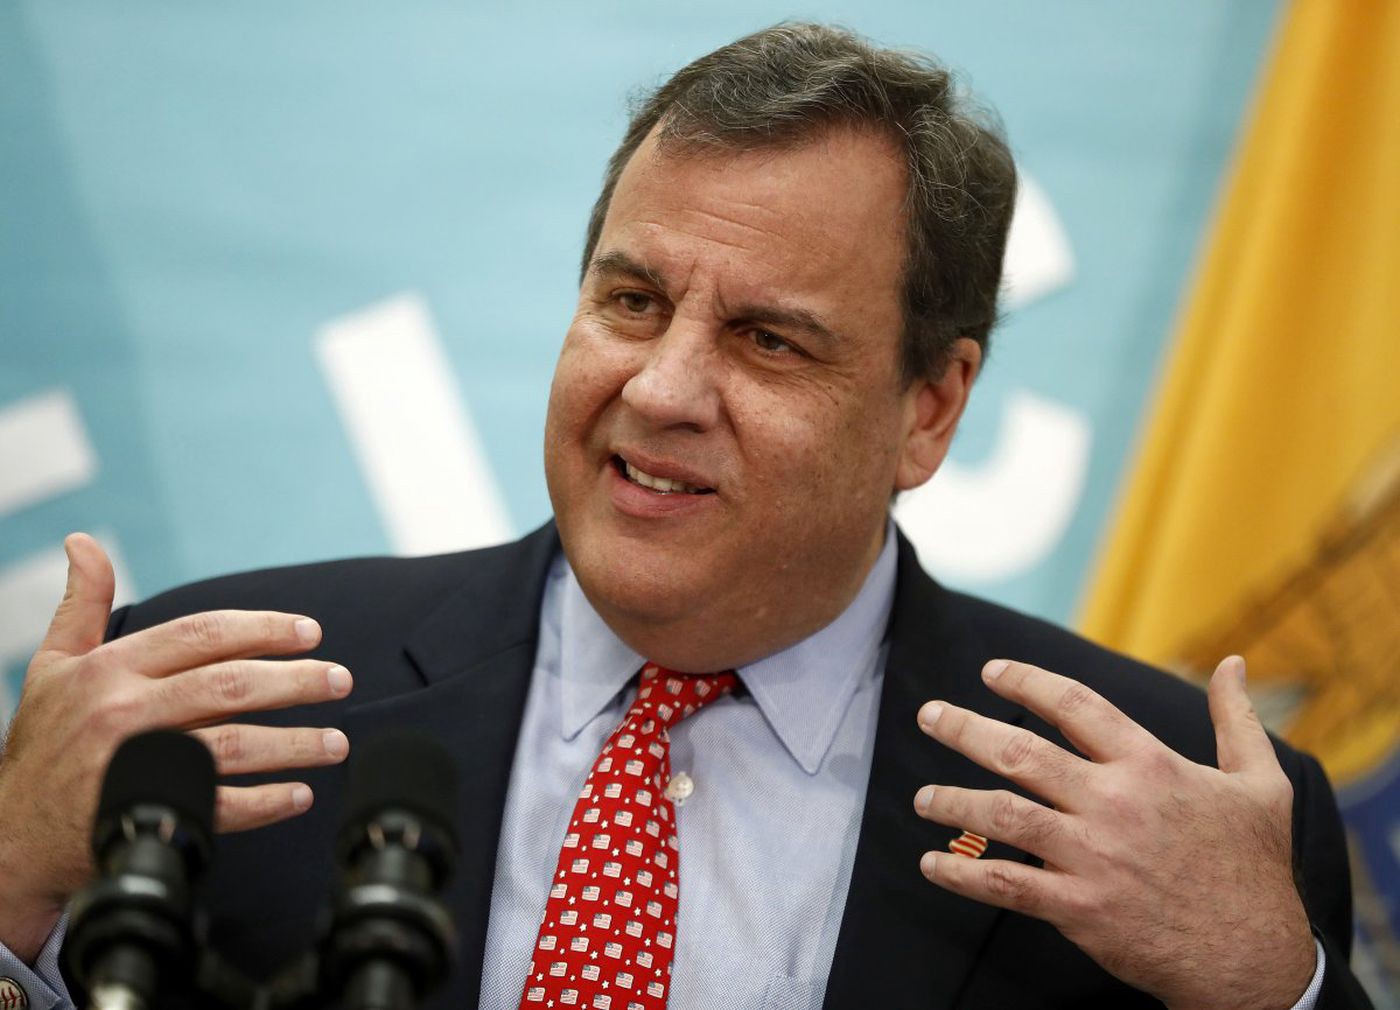 Former New Jersey governor Chris Christie doesn’t like the federal government telling him he can’t offer sports gambling, but has no problem telling private citizens and entrepreneurs that, unless they own a casino or racetrack, they can’t offer sports gambling.